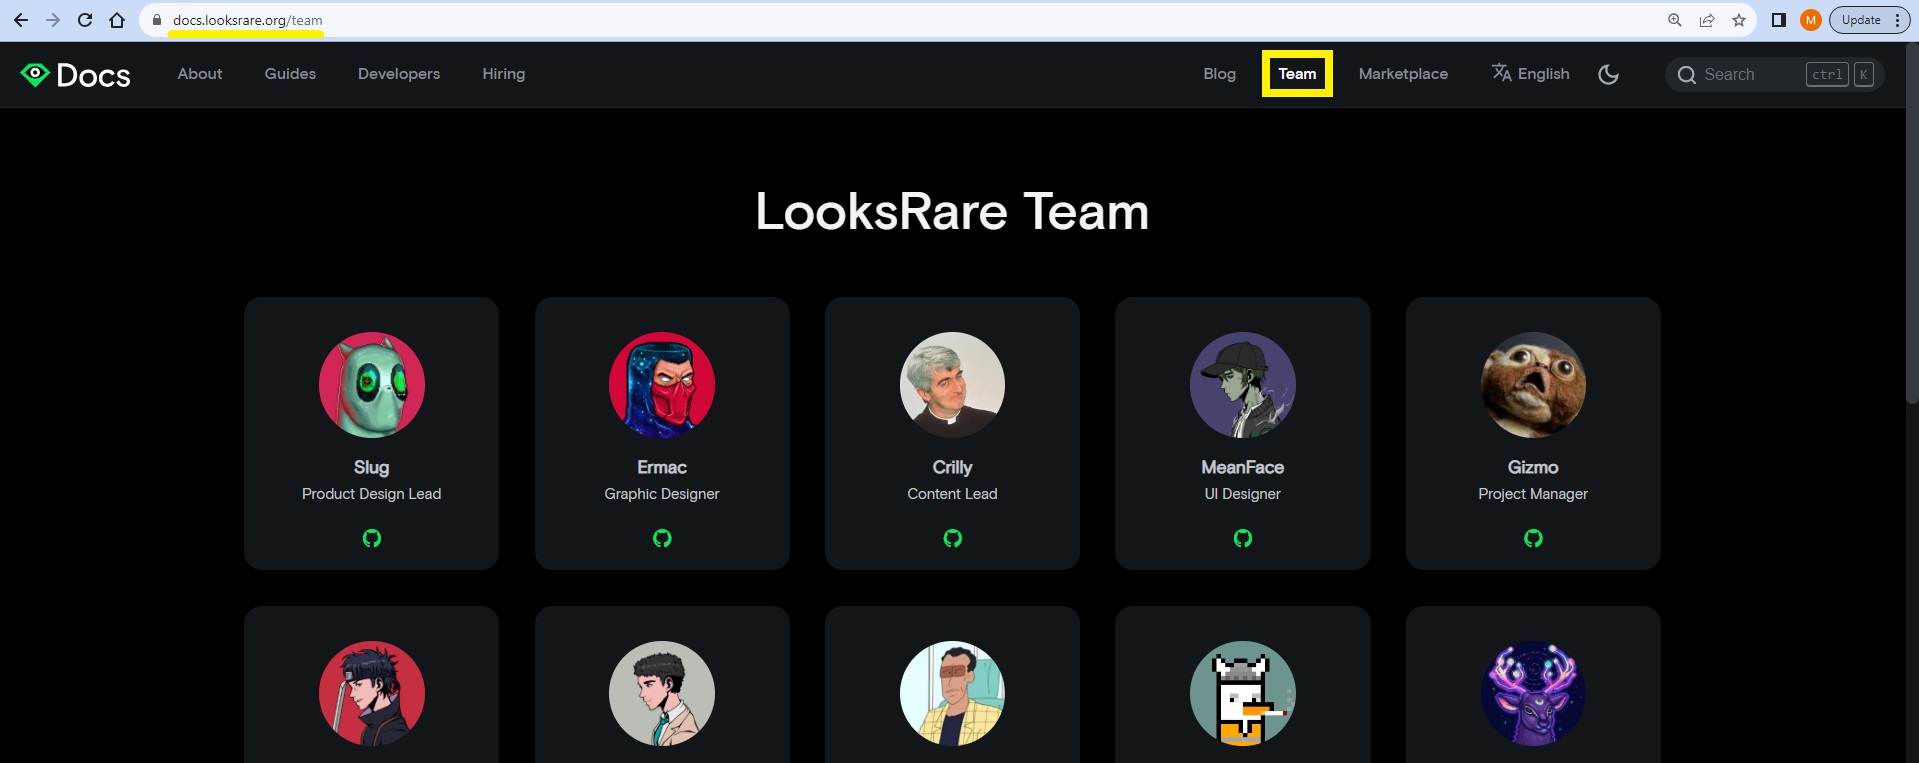 LooksRare Team Displayed on their official website